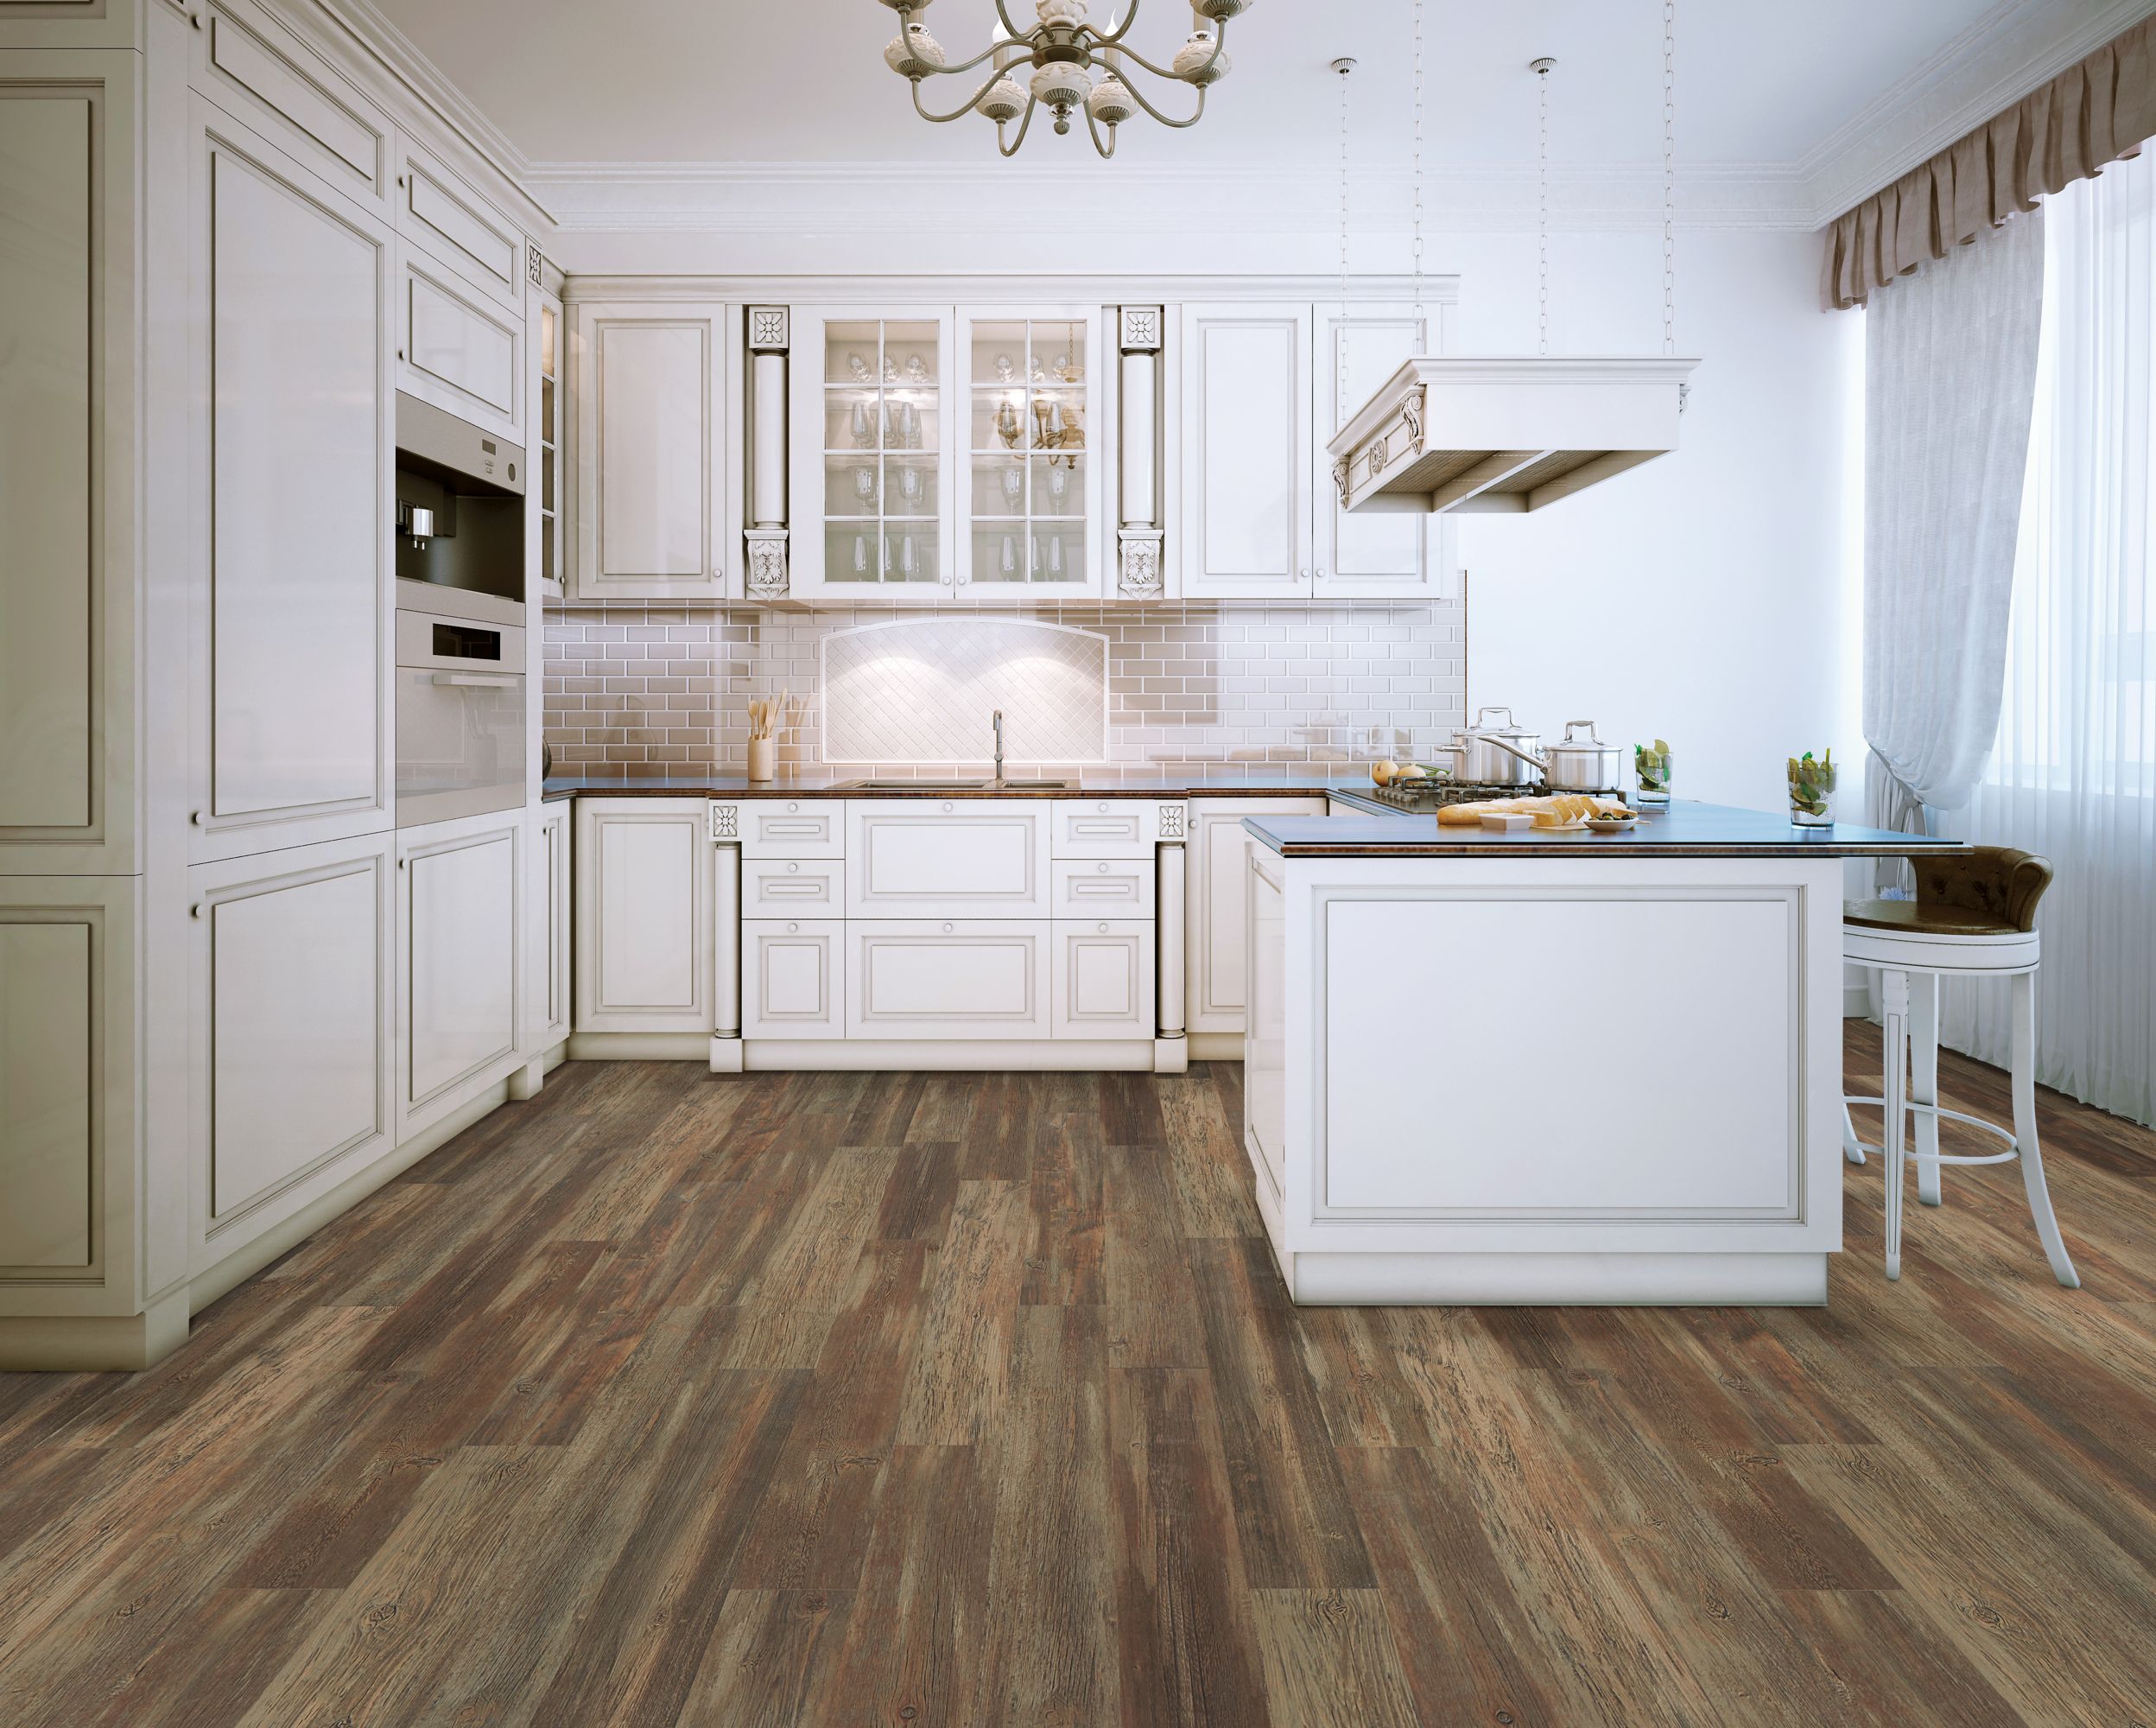 Natural texture resilient hardwood floor in traditional kitchen